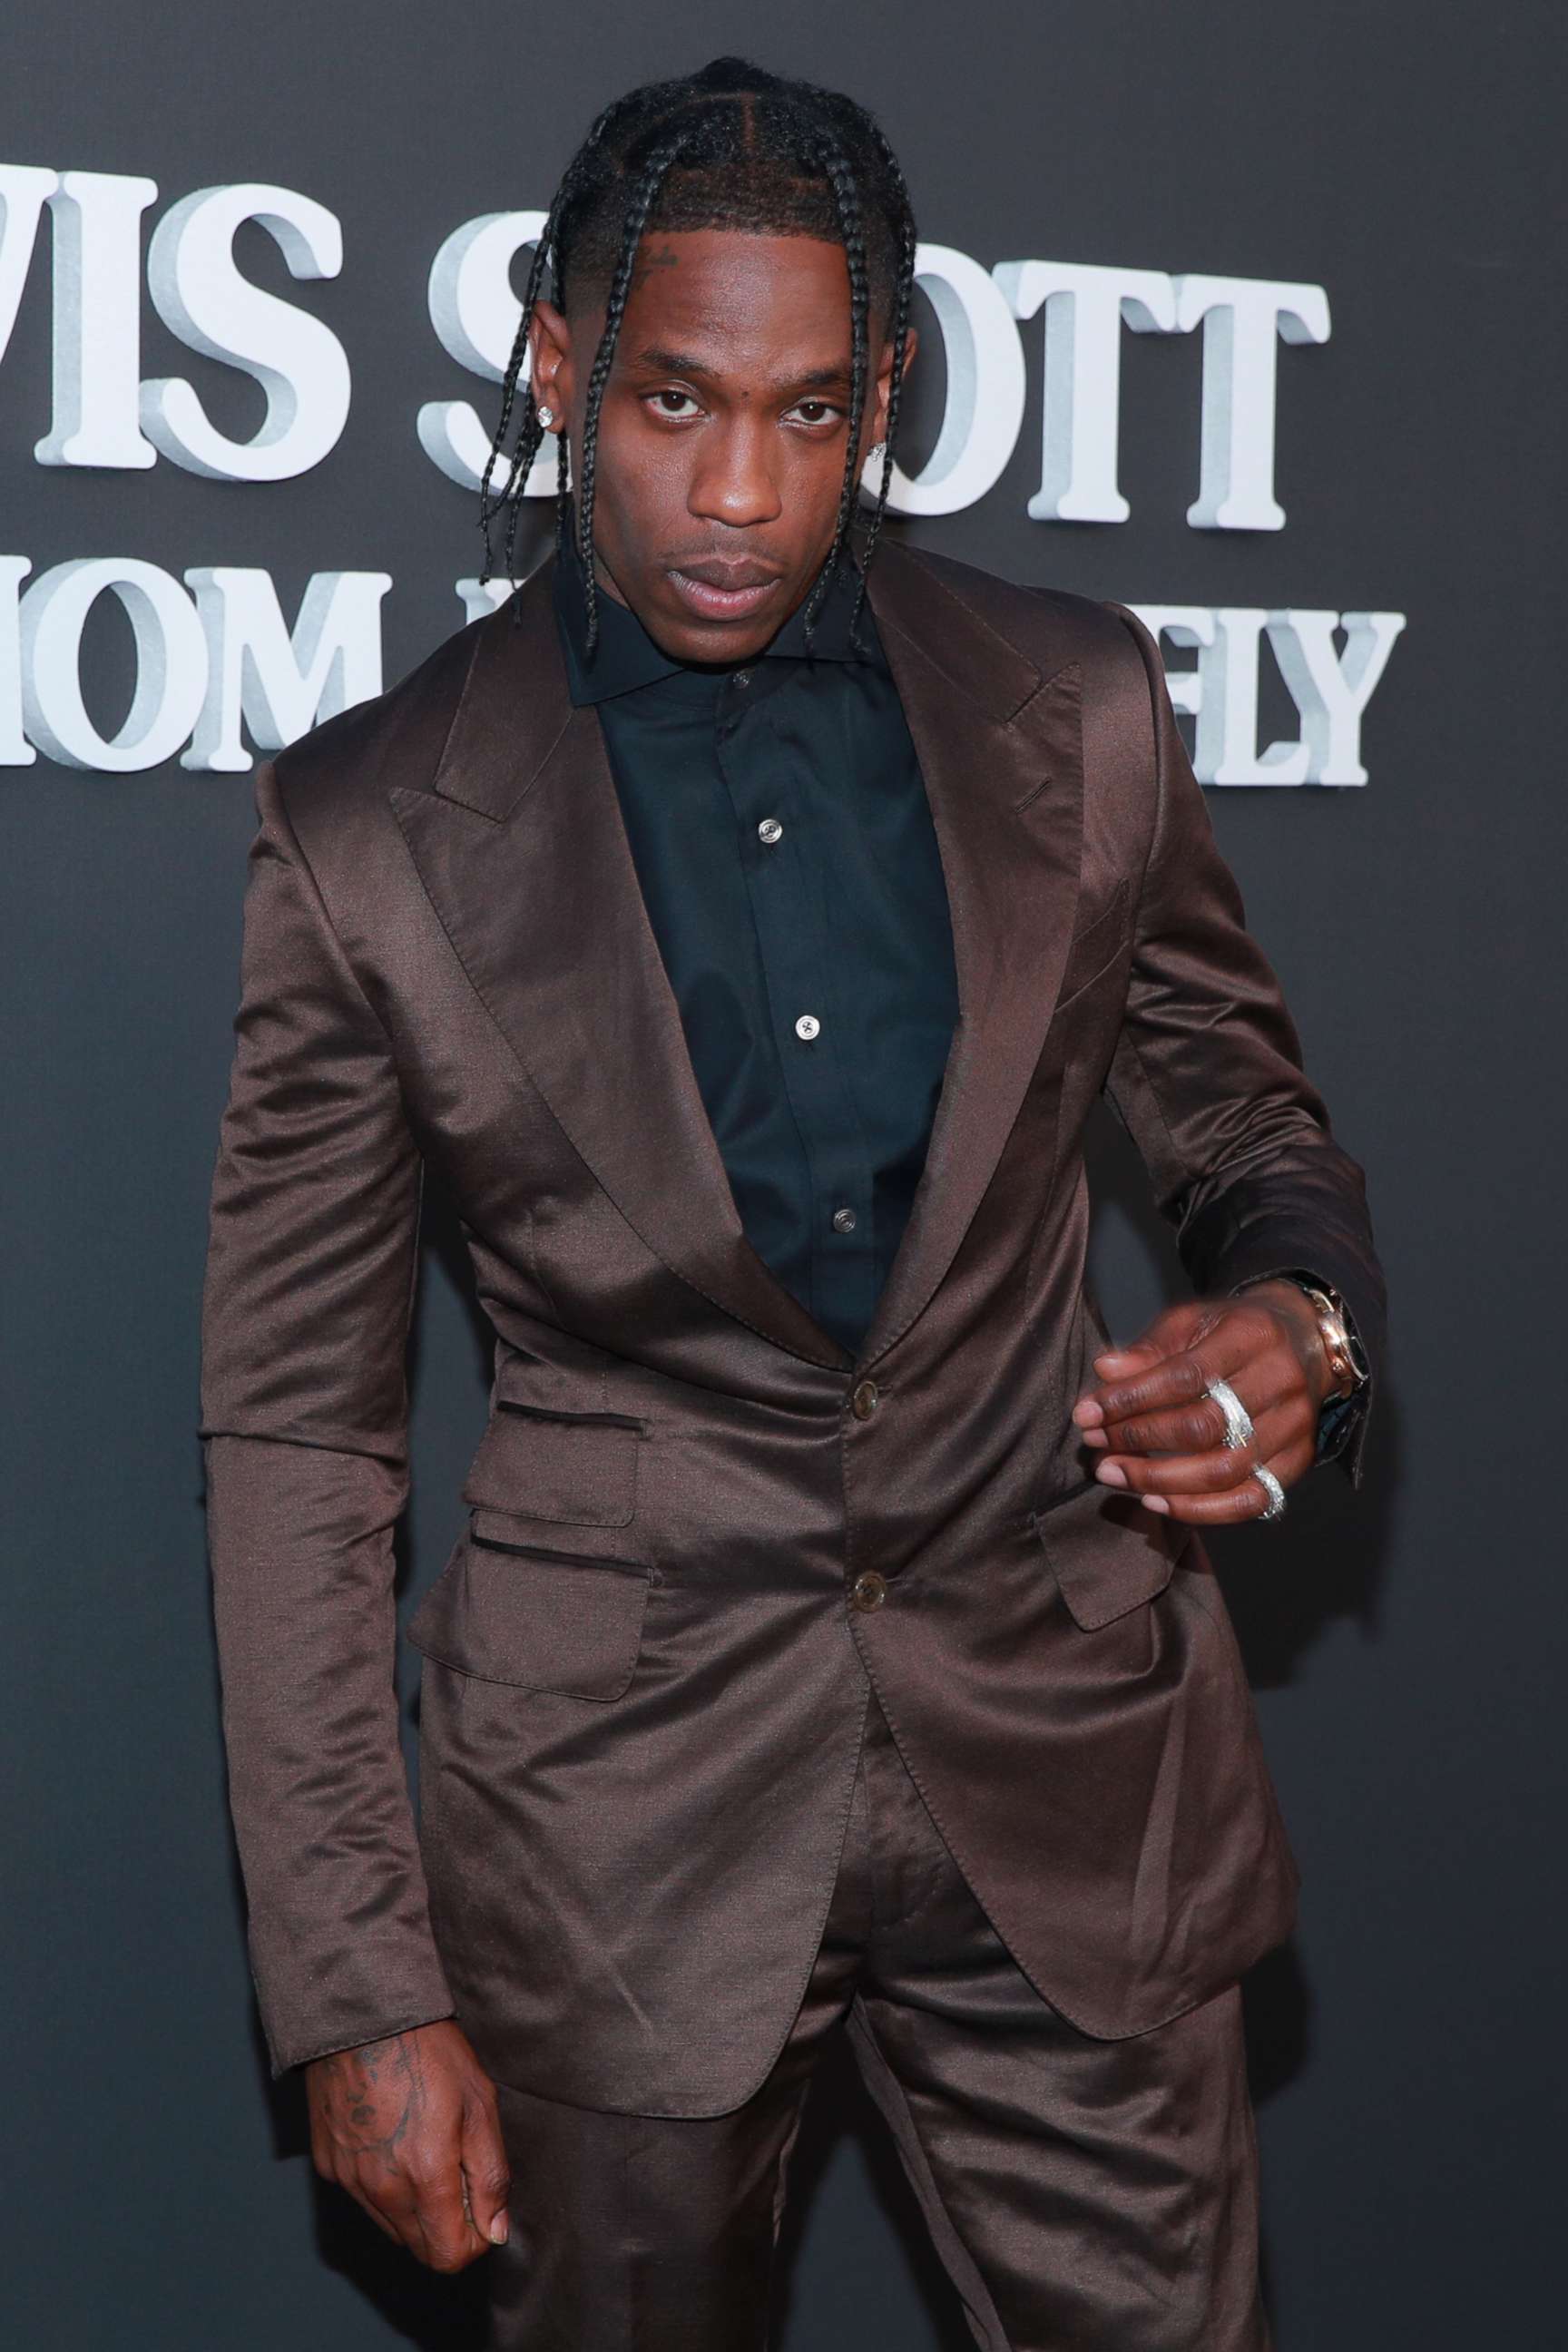 PHOTO: In this Aug. 27, 2019, file photo, Travis Scott attends the premiere of Netflix's "Travis Scott: Look Mom I Can Fly" in Santa Monica, Calif.